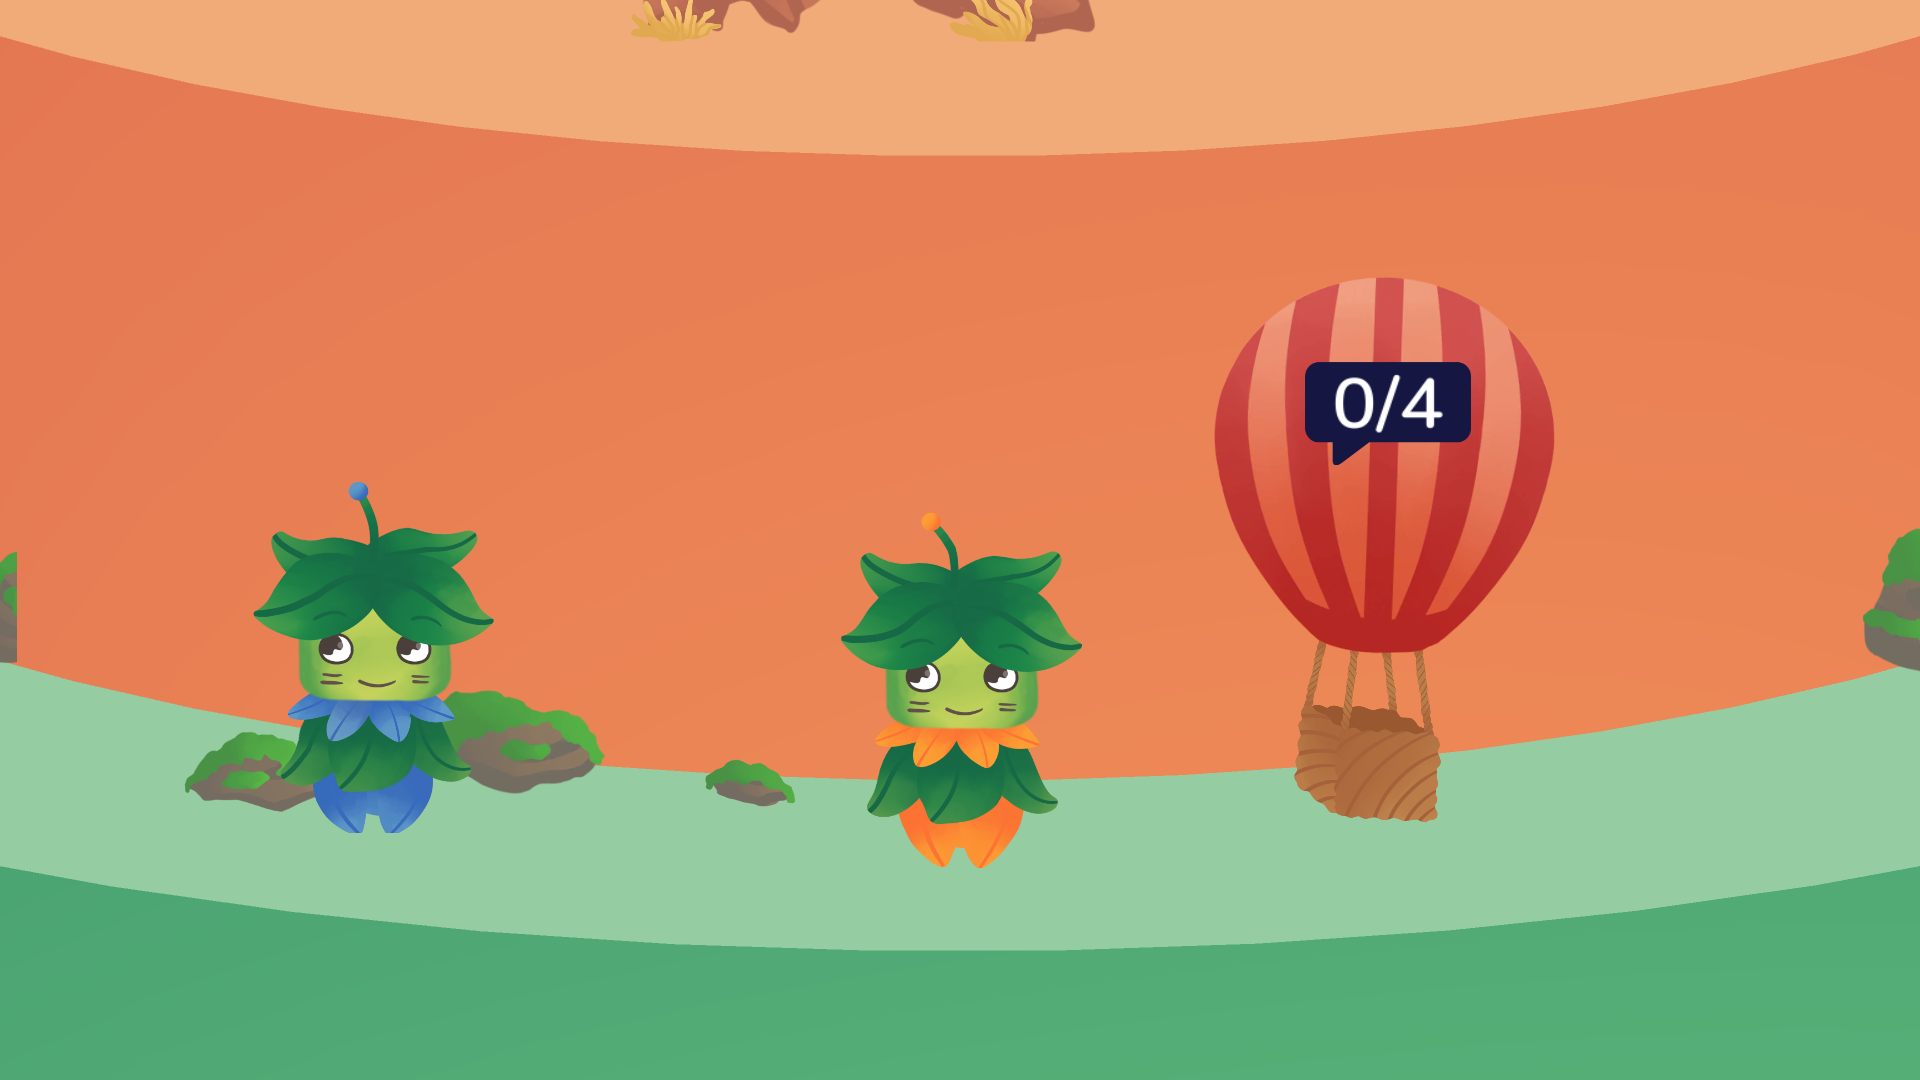 Screenshot of the game SumMit. In the center of the screen is a green and orange character, its hair and dress are made of leaves. It stands on the plateau of a multilevel cylindrical mountain. At its left is another character, colored green and blue instead. At its right a hot-air balloon can be seen, on top of it a counter that says '0 of 4'.